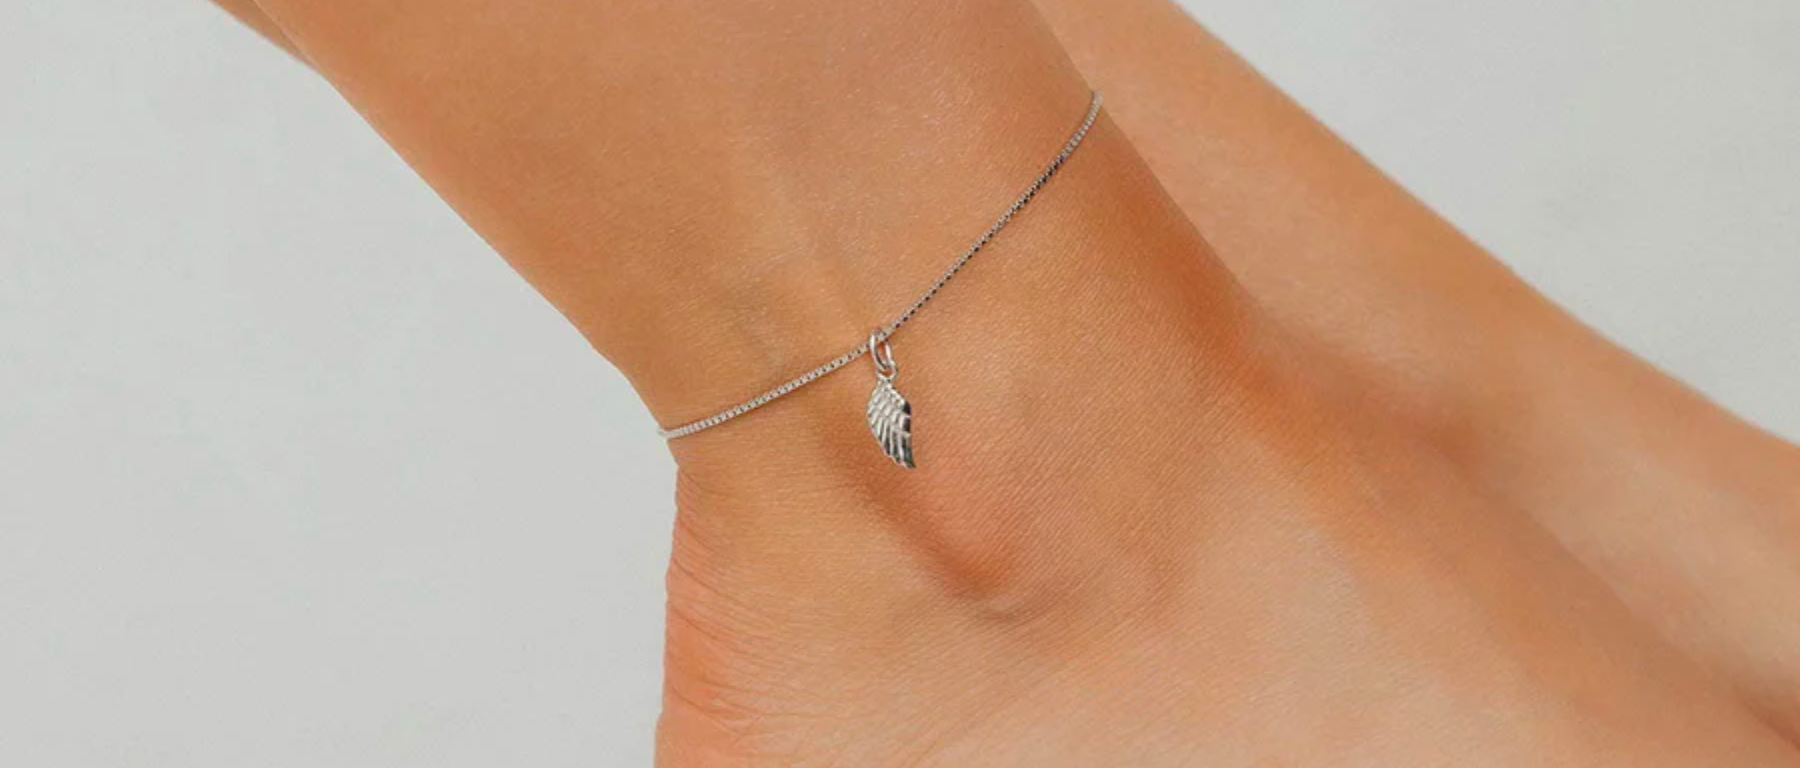 wehoautodetail ANGEL WING CHARM ADJUSTABLE ANKLET